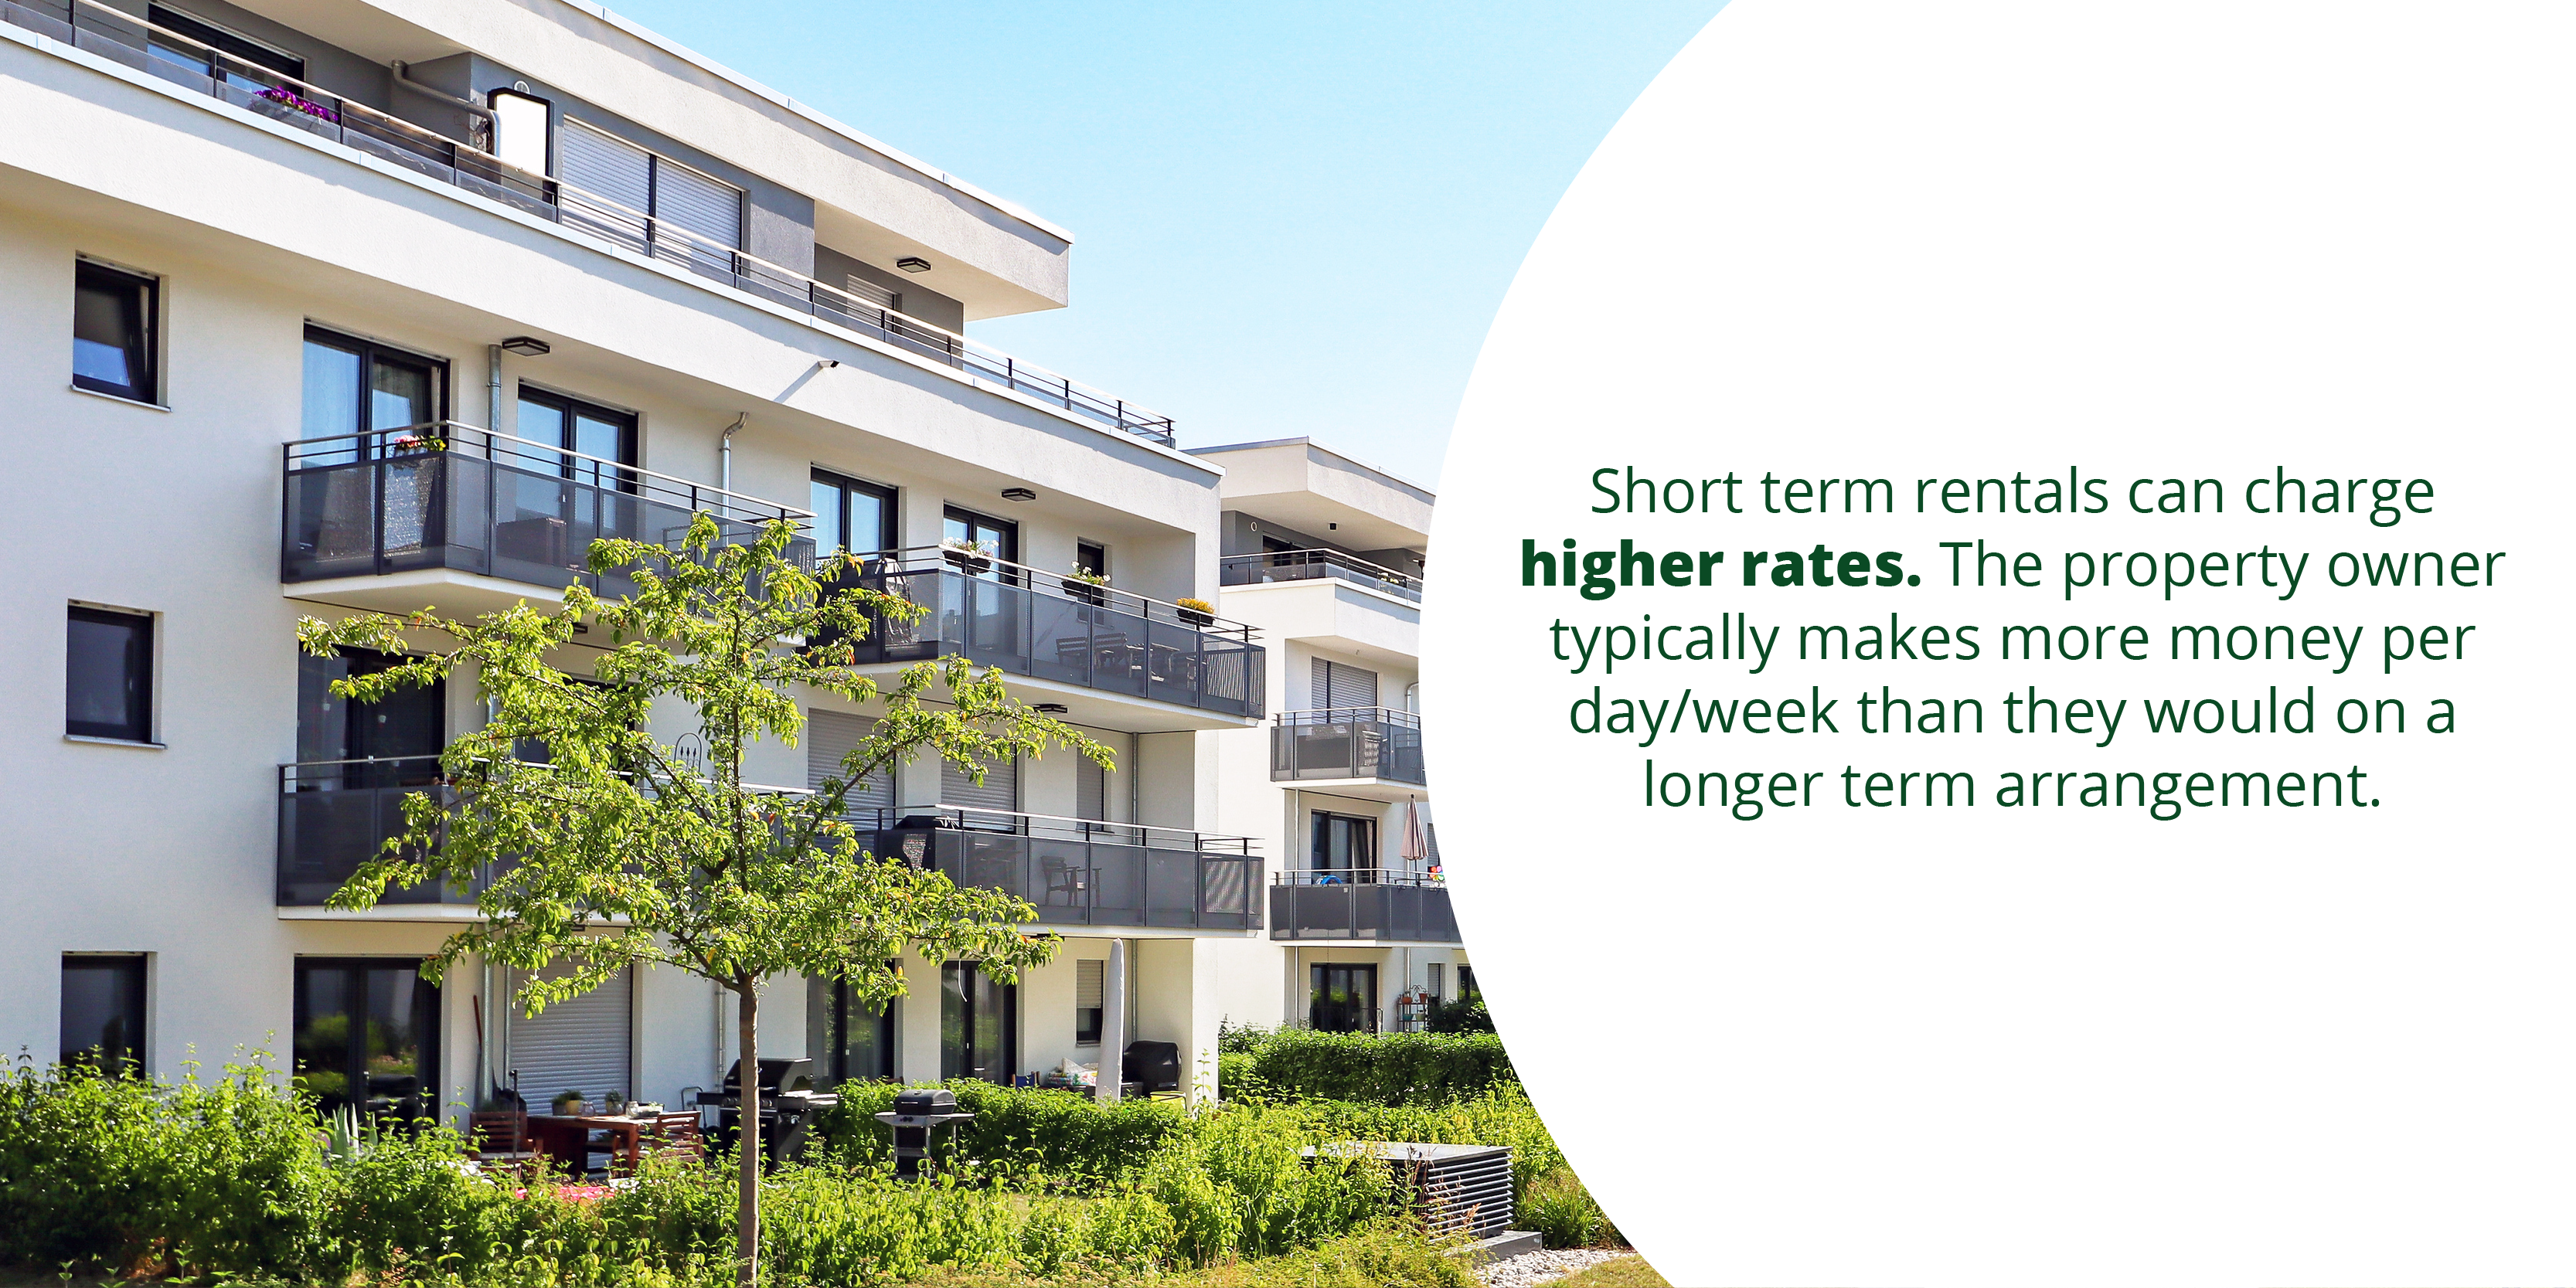 Short_term_rentals_can_charge_higher_rates_2